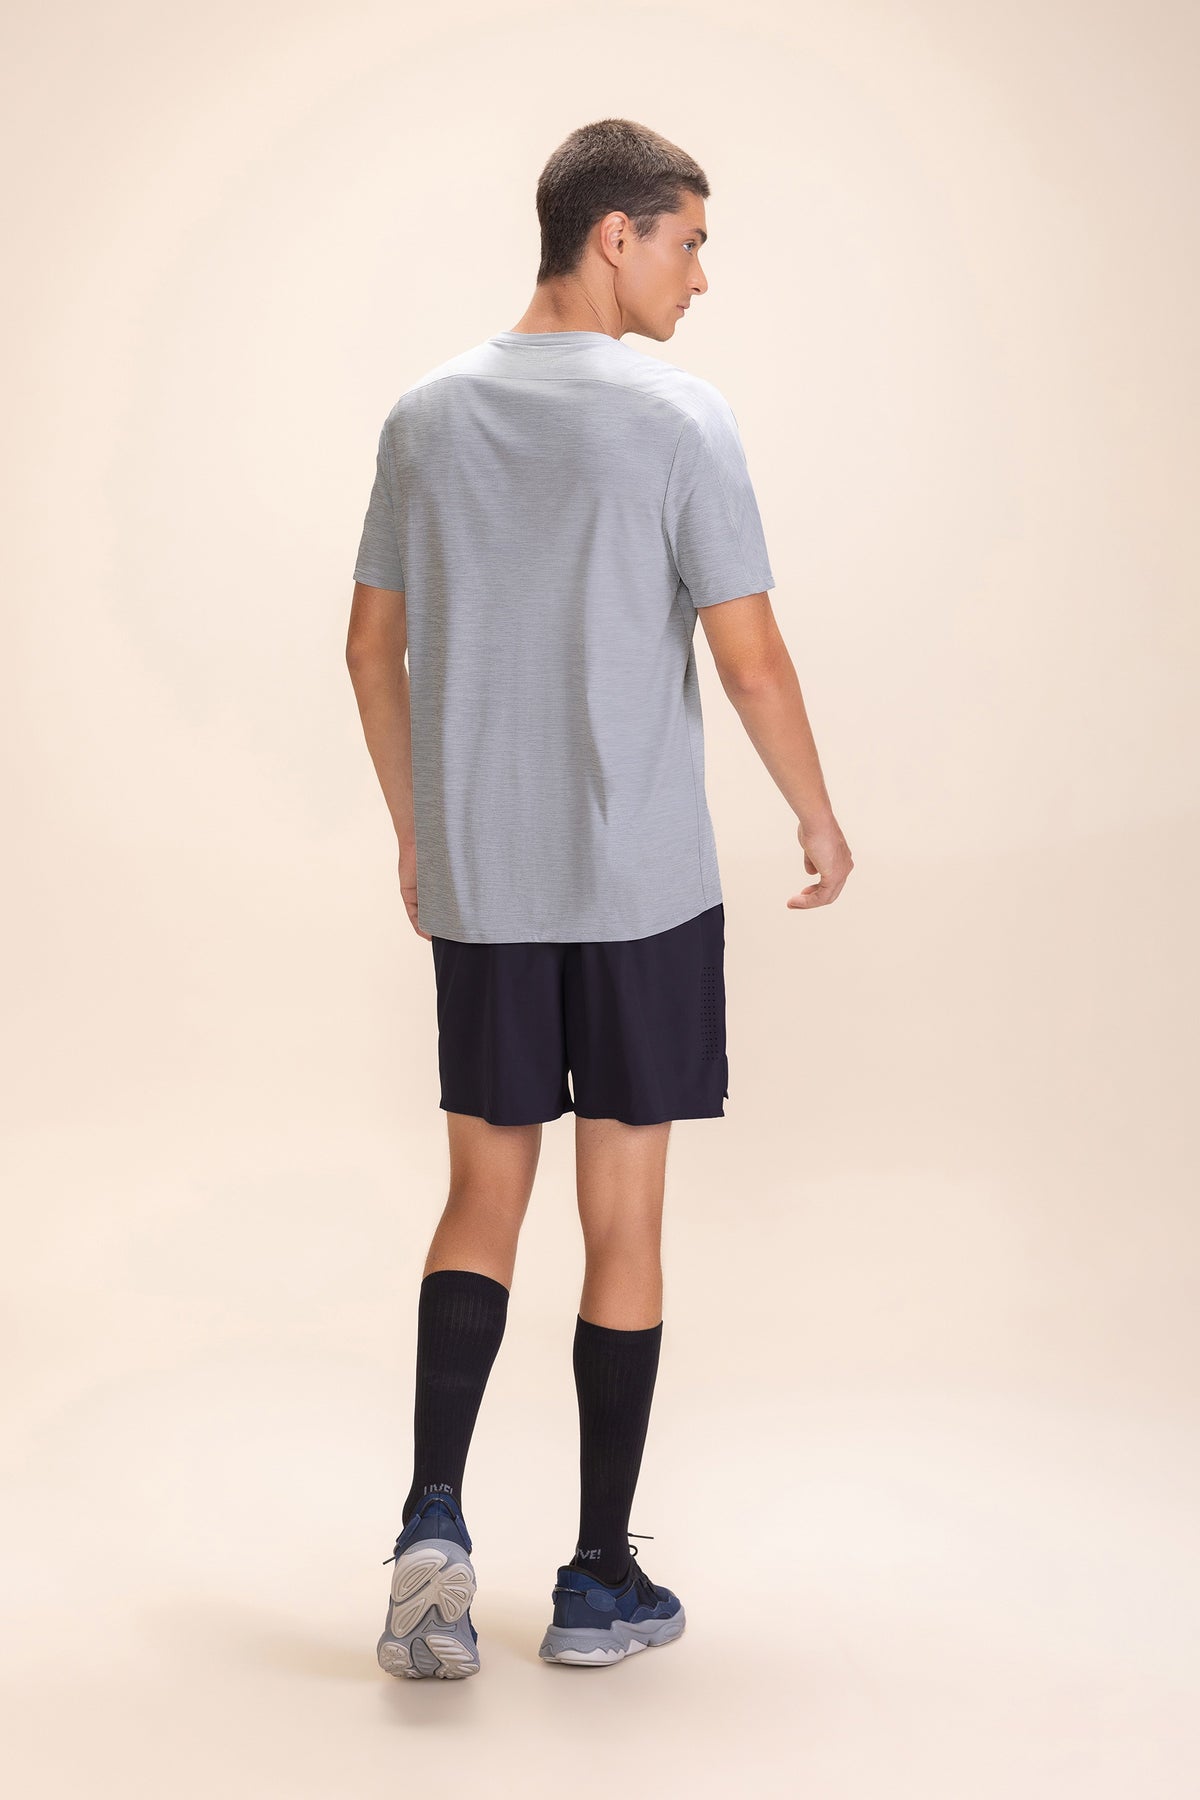 Comfy Merged Stay Men's T-shirt